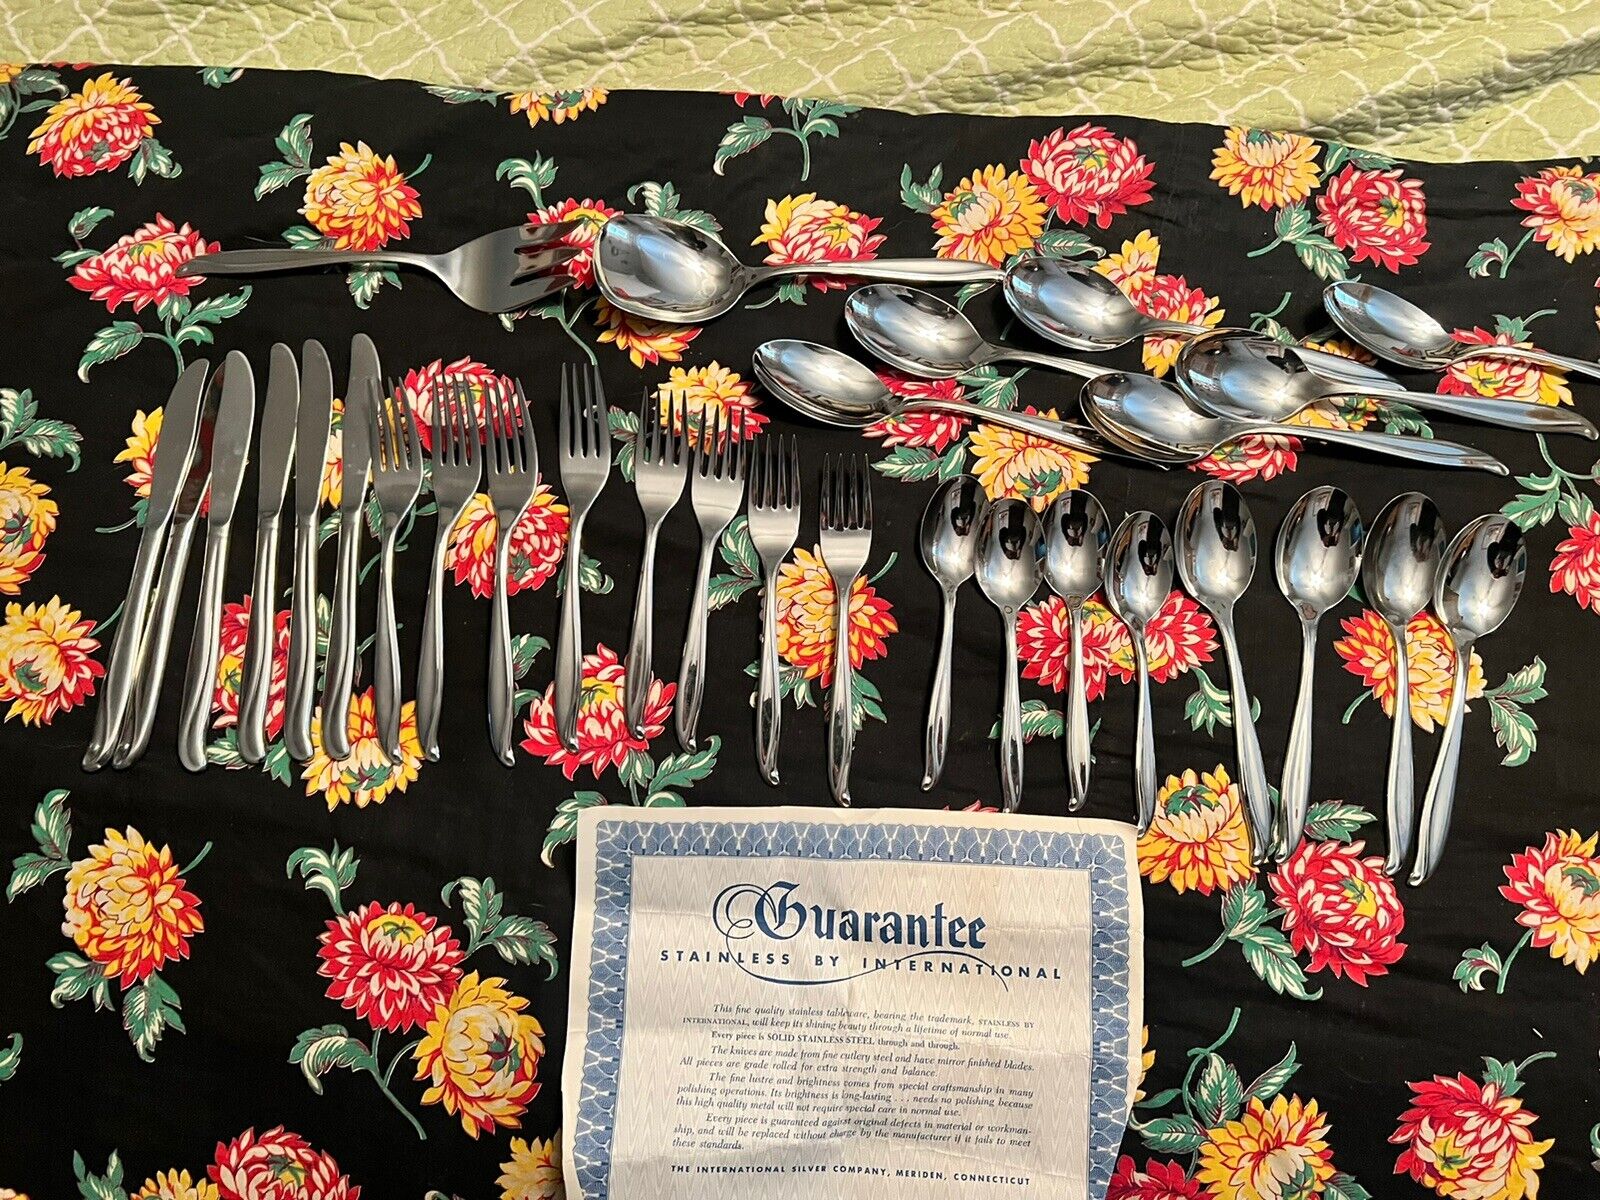 30 pc Stainless by International TRADEWINDS JAMAICA Spoons Forks Knives